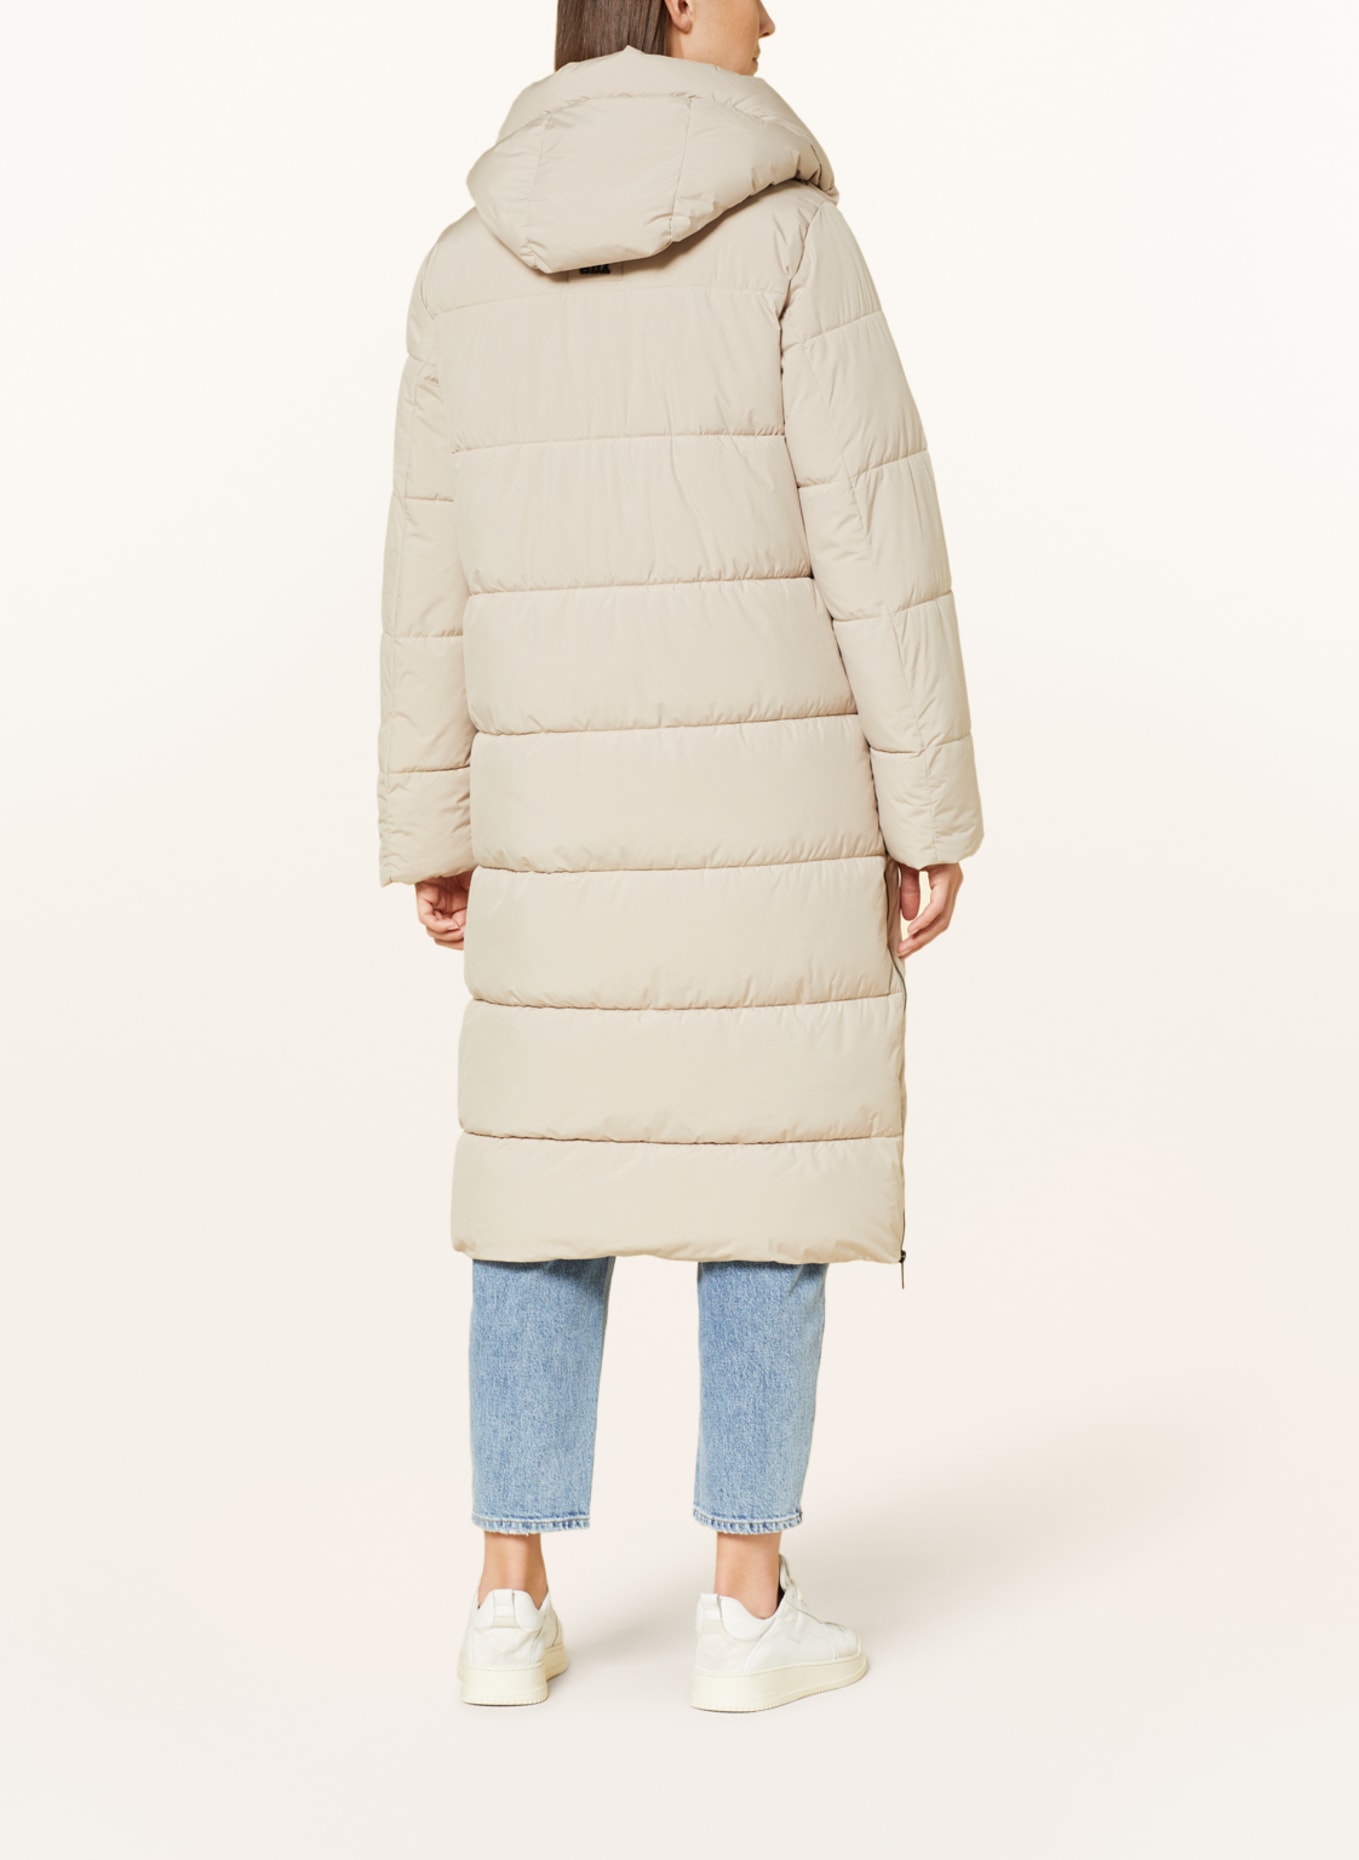 coat killtec G.I.G.A. beige GW DX by 50 Quilted in